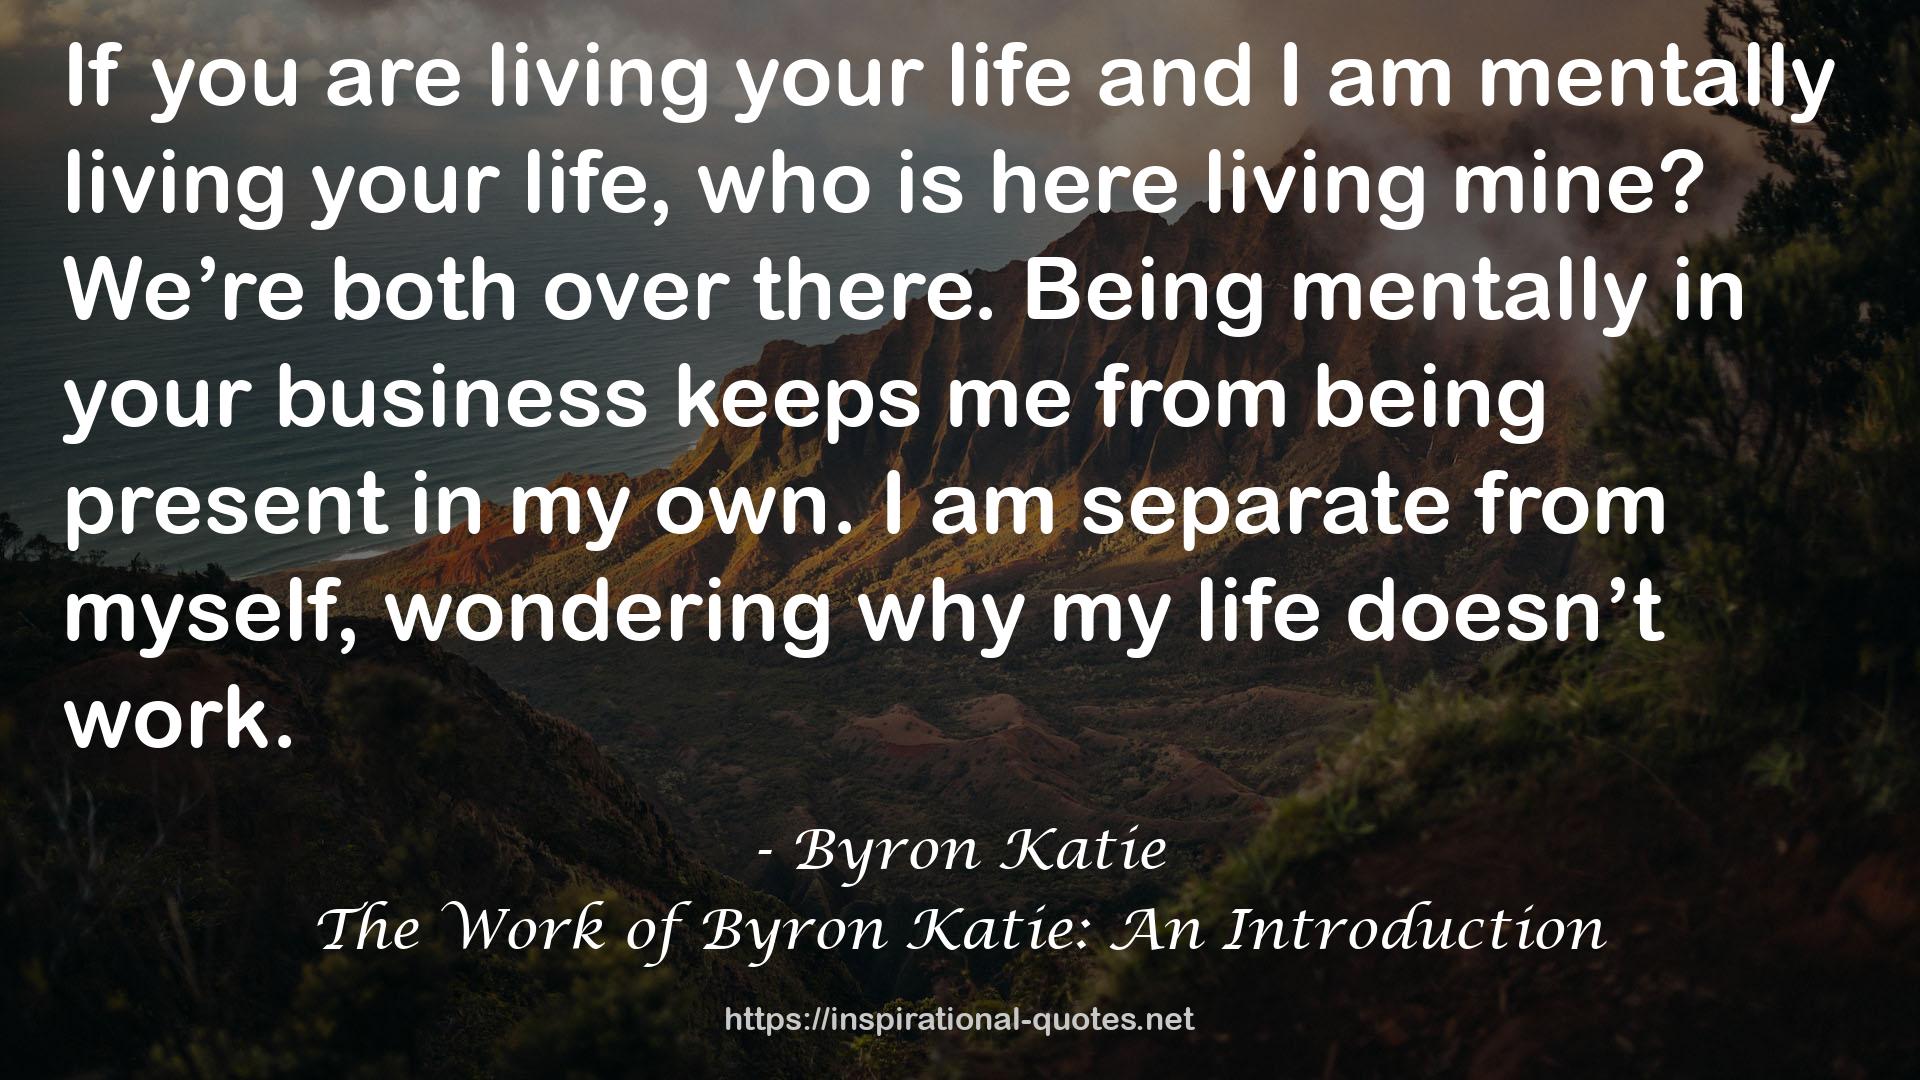 The Work of Byron Katie: An Introduction QUOTES